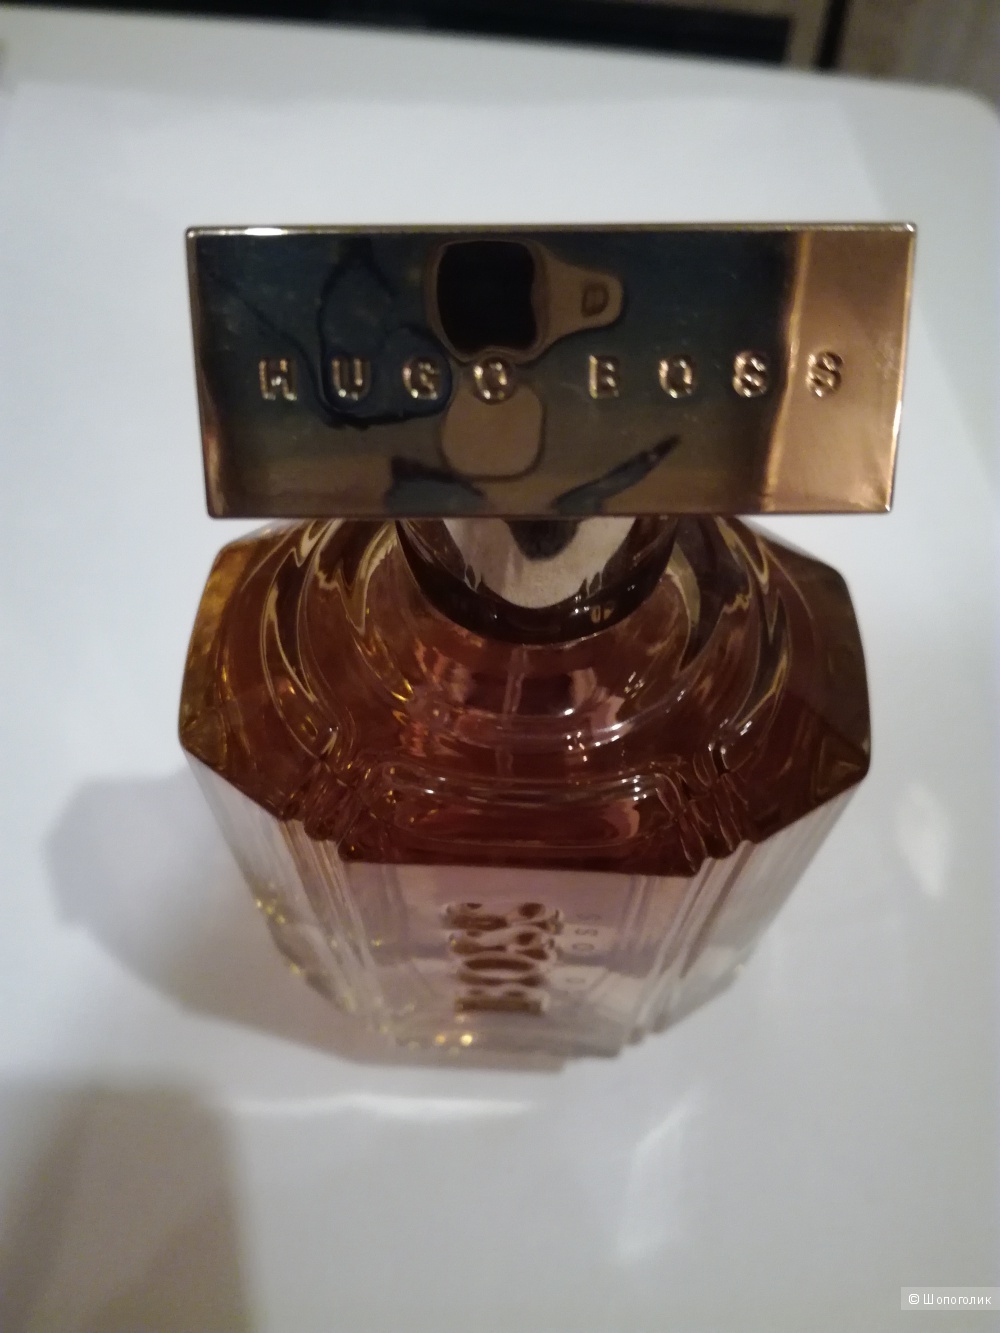 Парфюм Hugo Boss, The Scent Private Accord for Her 100 мл.